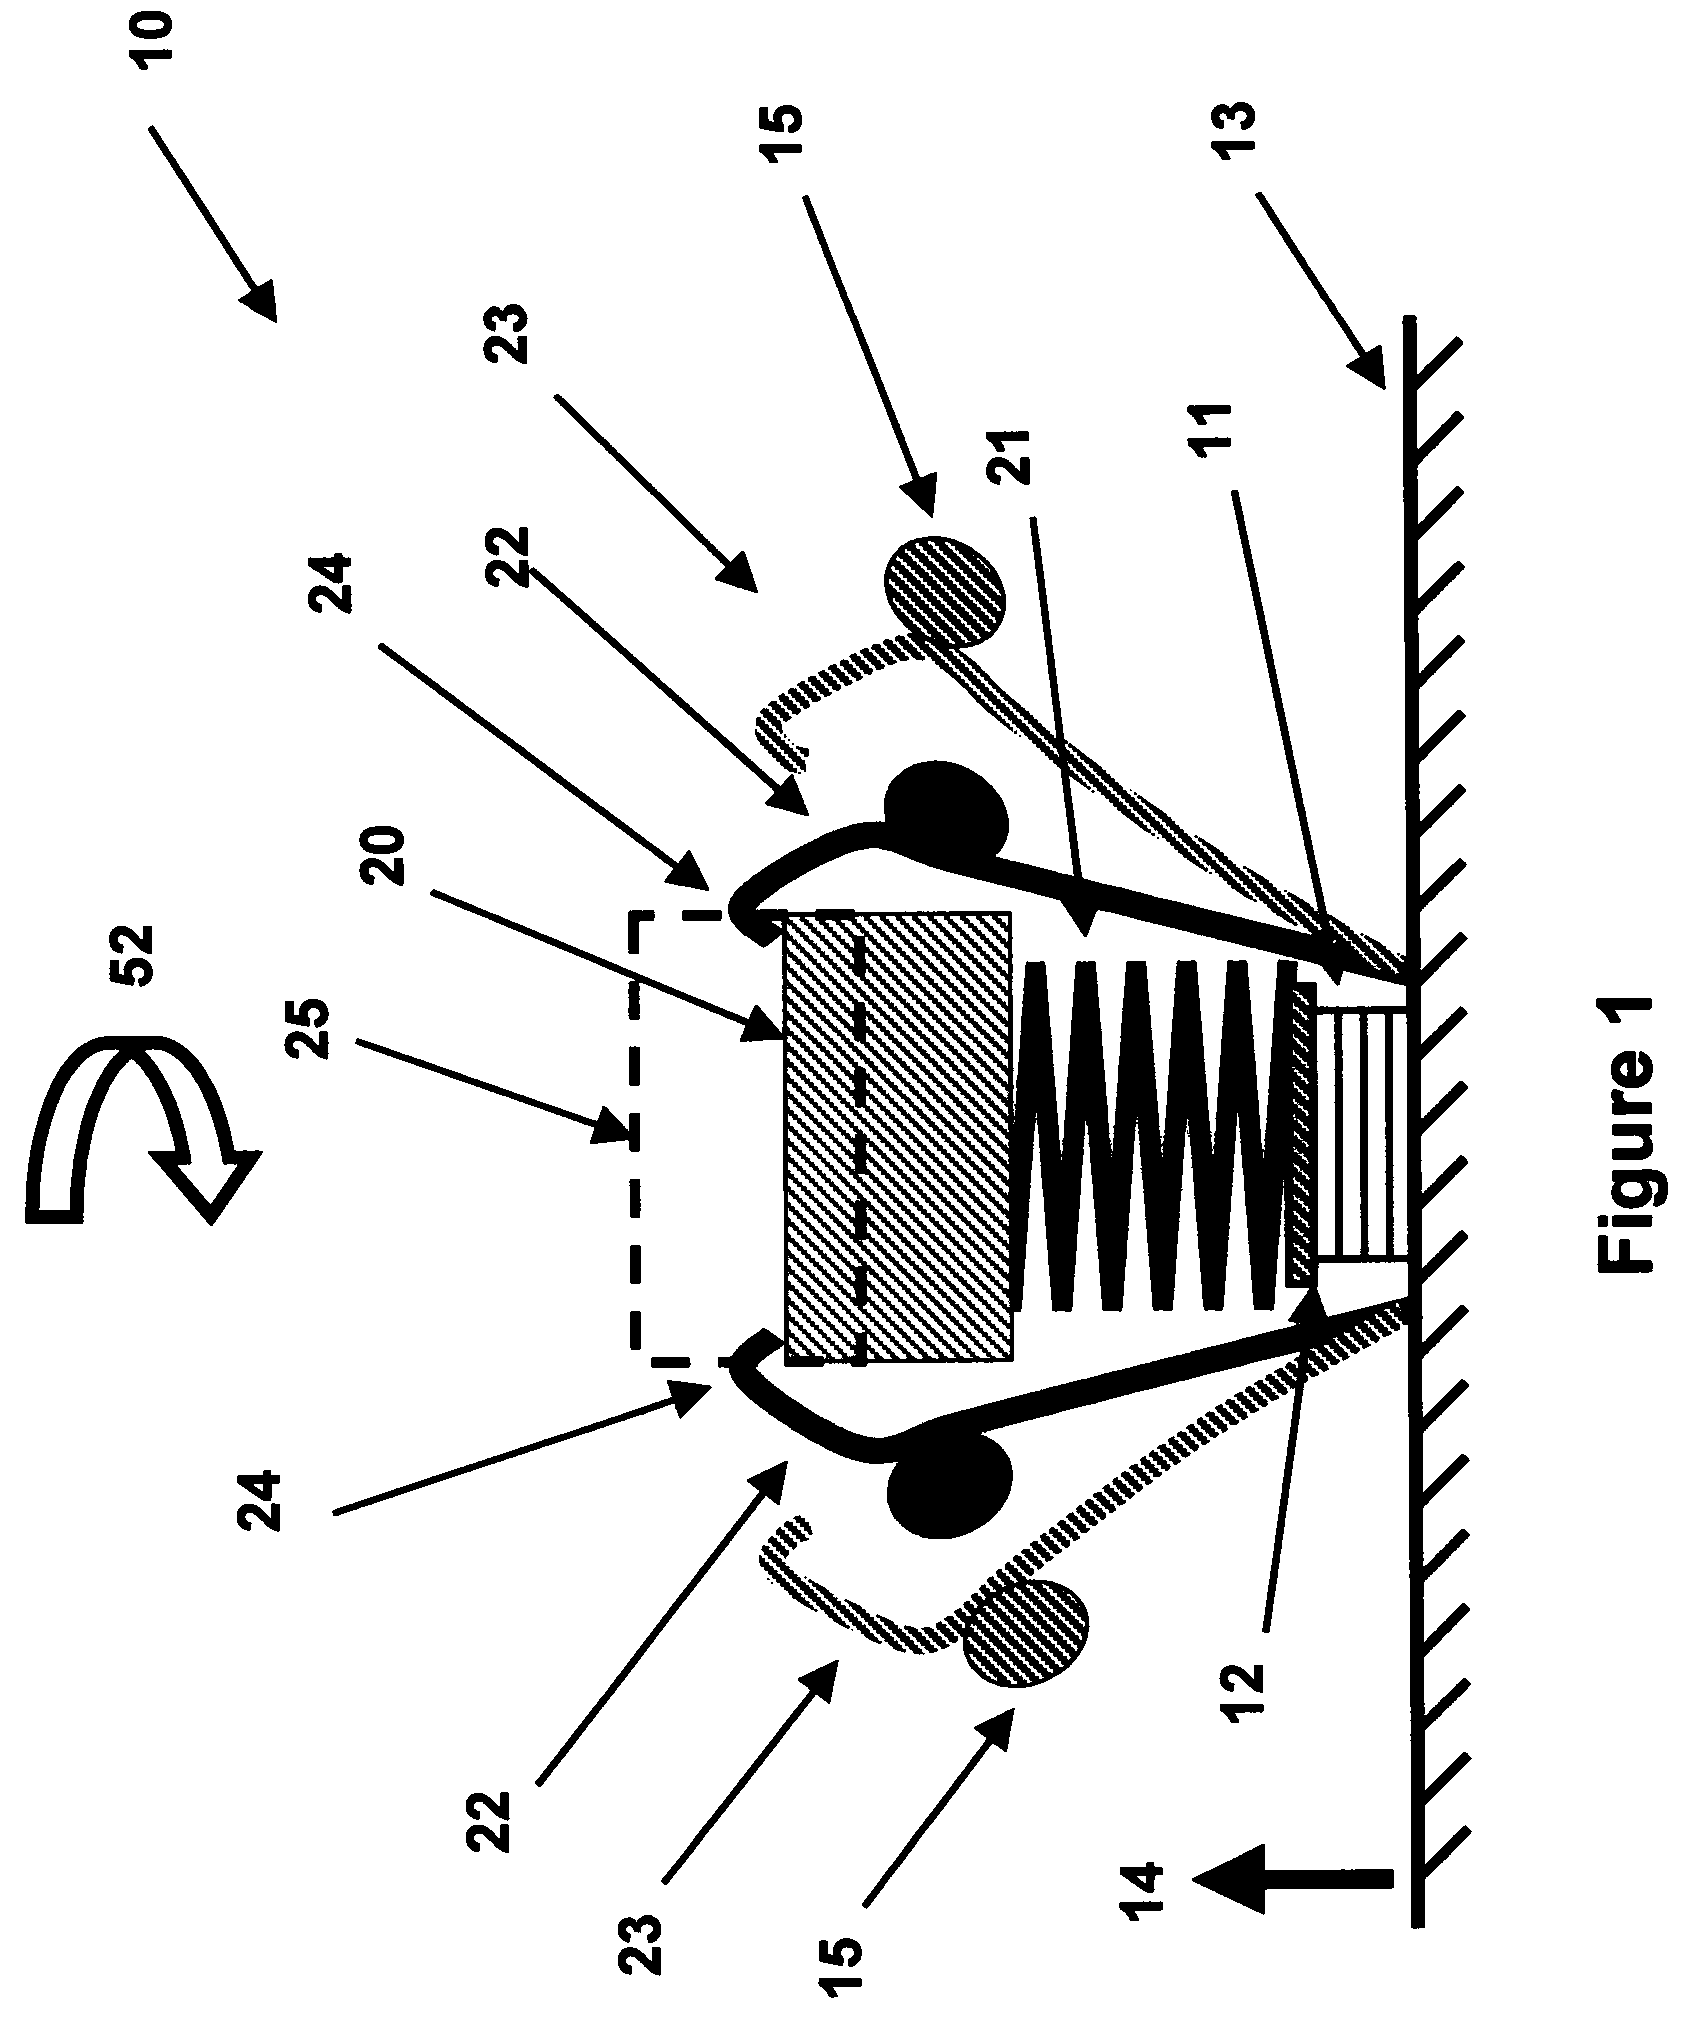 Methods and apparatus for mechanical reserve power sources for gun-fired munitions, mortars, and gravity dropped weapons